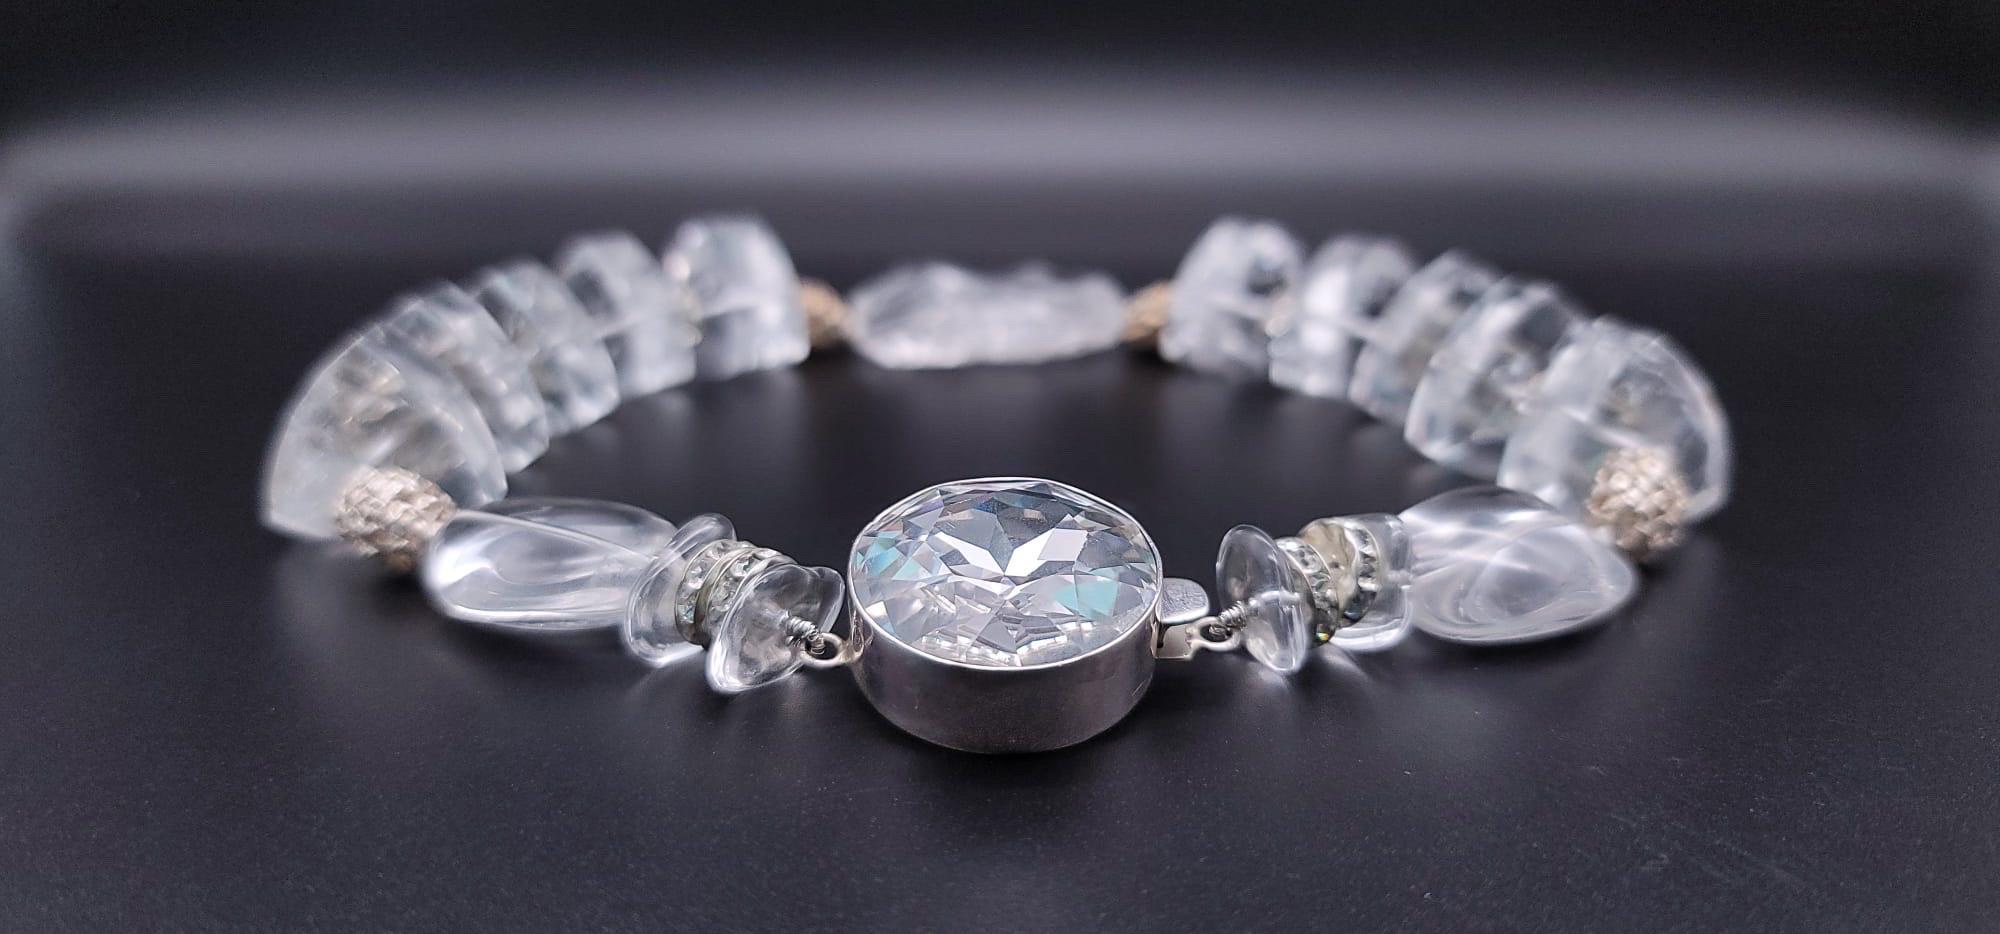 A.Jeschel Impressive Icy Crystal and Sterling Silver Necklace. For Sale 2